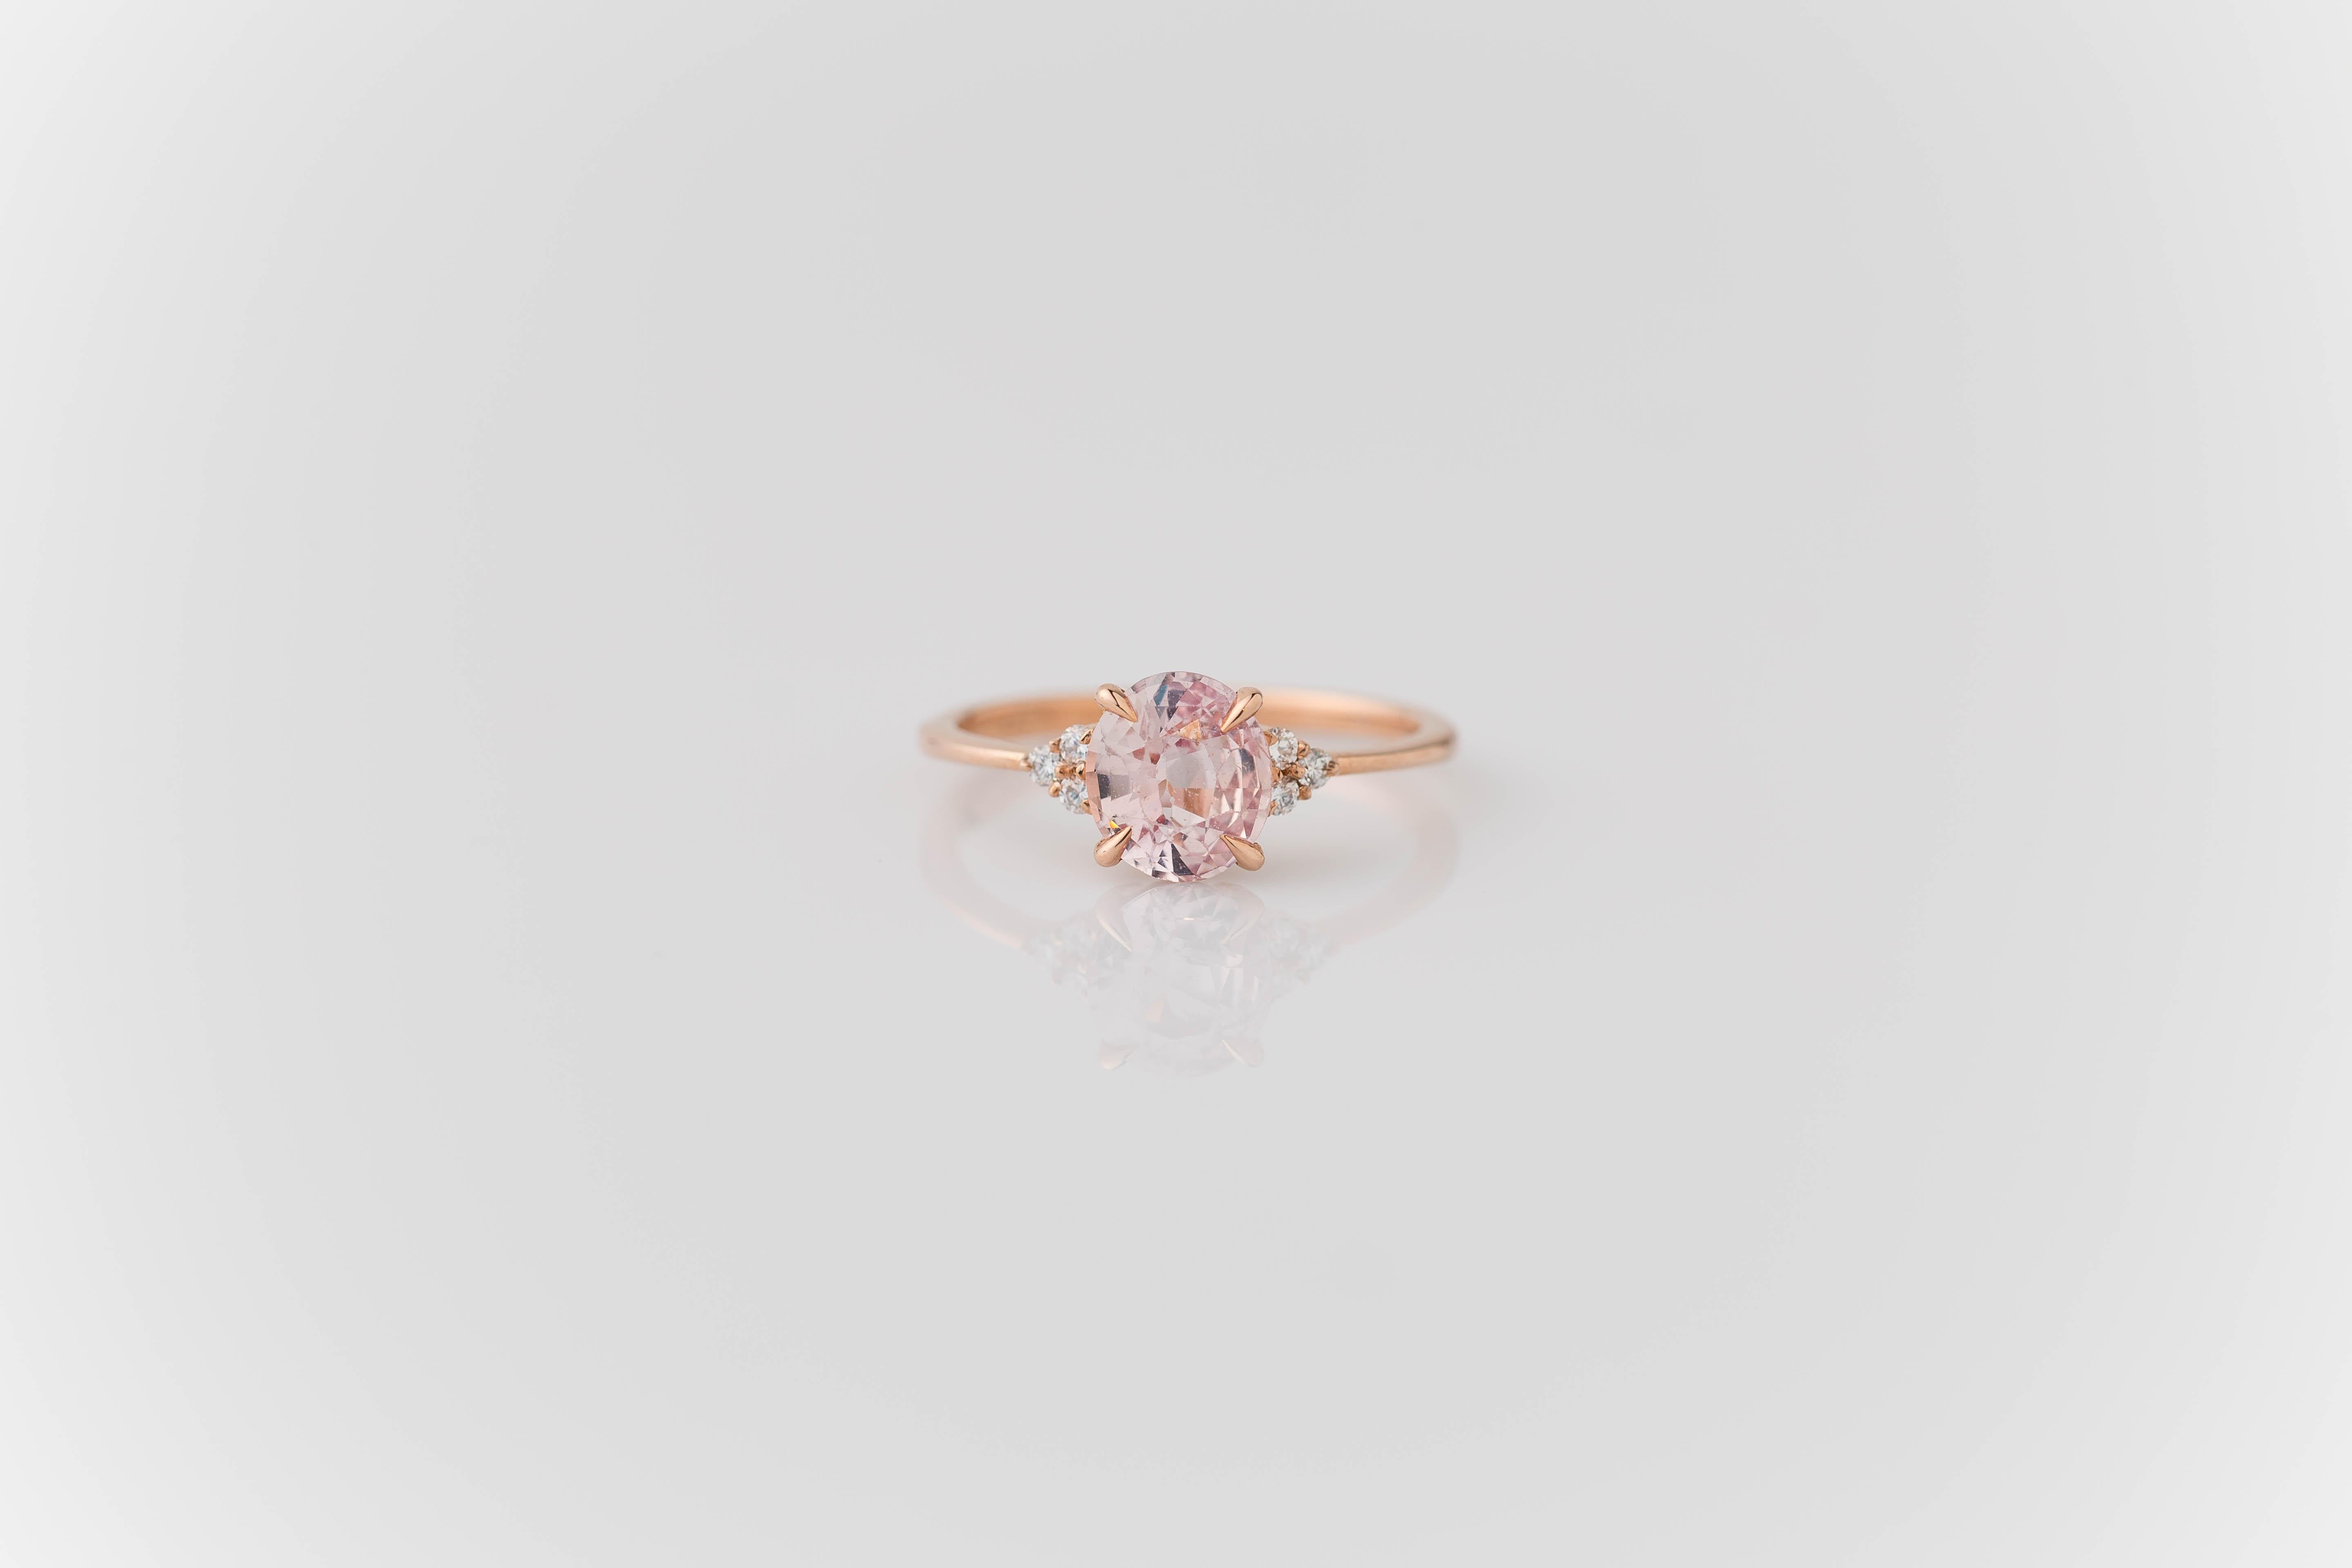 This elegant 14K rose gold knife-edge style ring features a stunning and unheated 1.41-carat oval peachy-pink sapphire at its center, certified by the GIA for its quality and authenticity. Flanking the sapphire are six round brilliant cut diamonds,